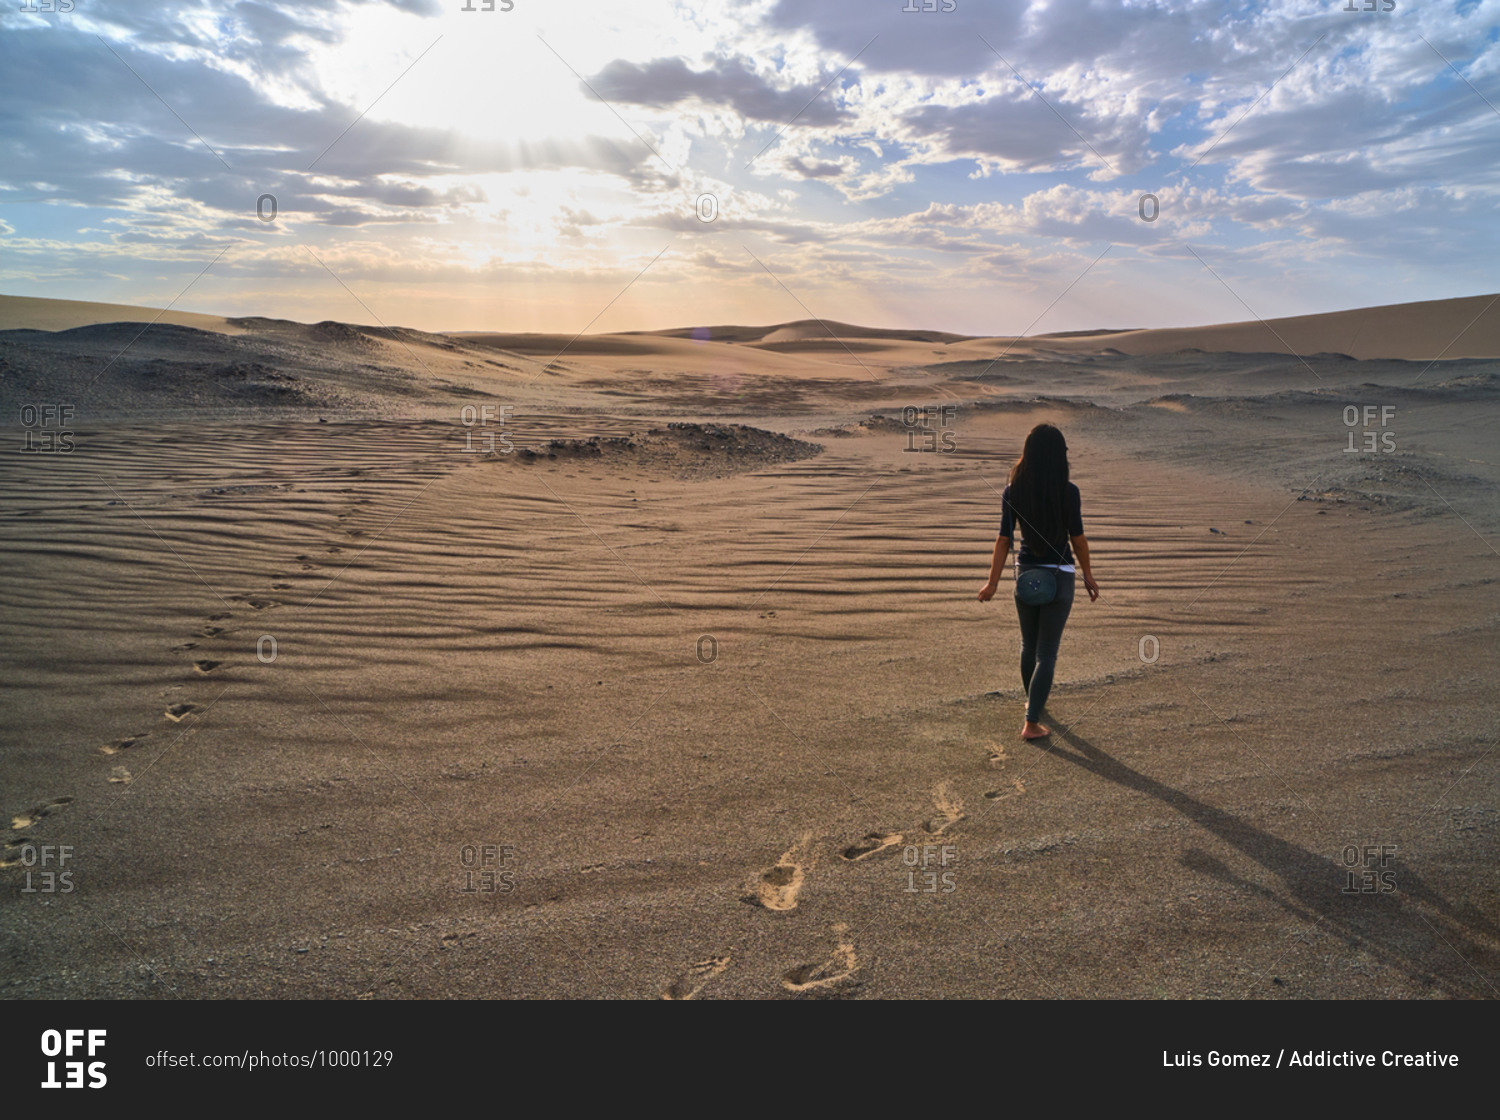 Back view of anonymous female tourist strolling in sandy terrain in desert with dry wavy surface under cloudy sky